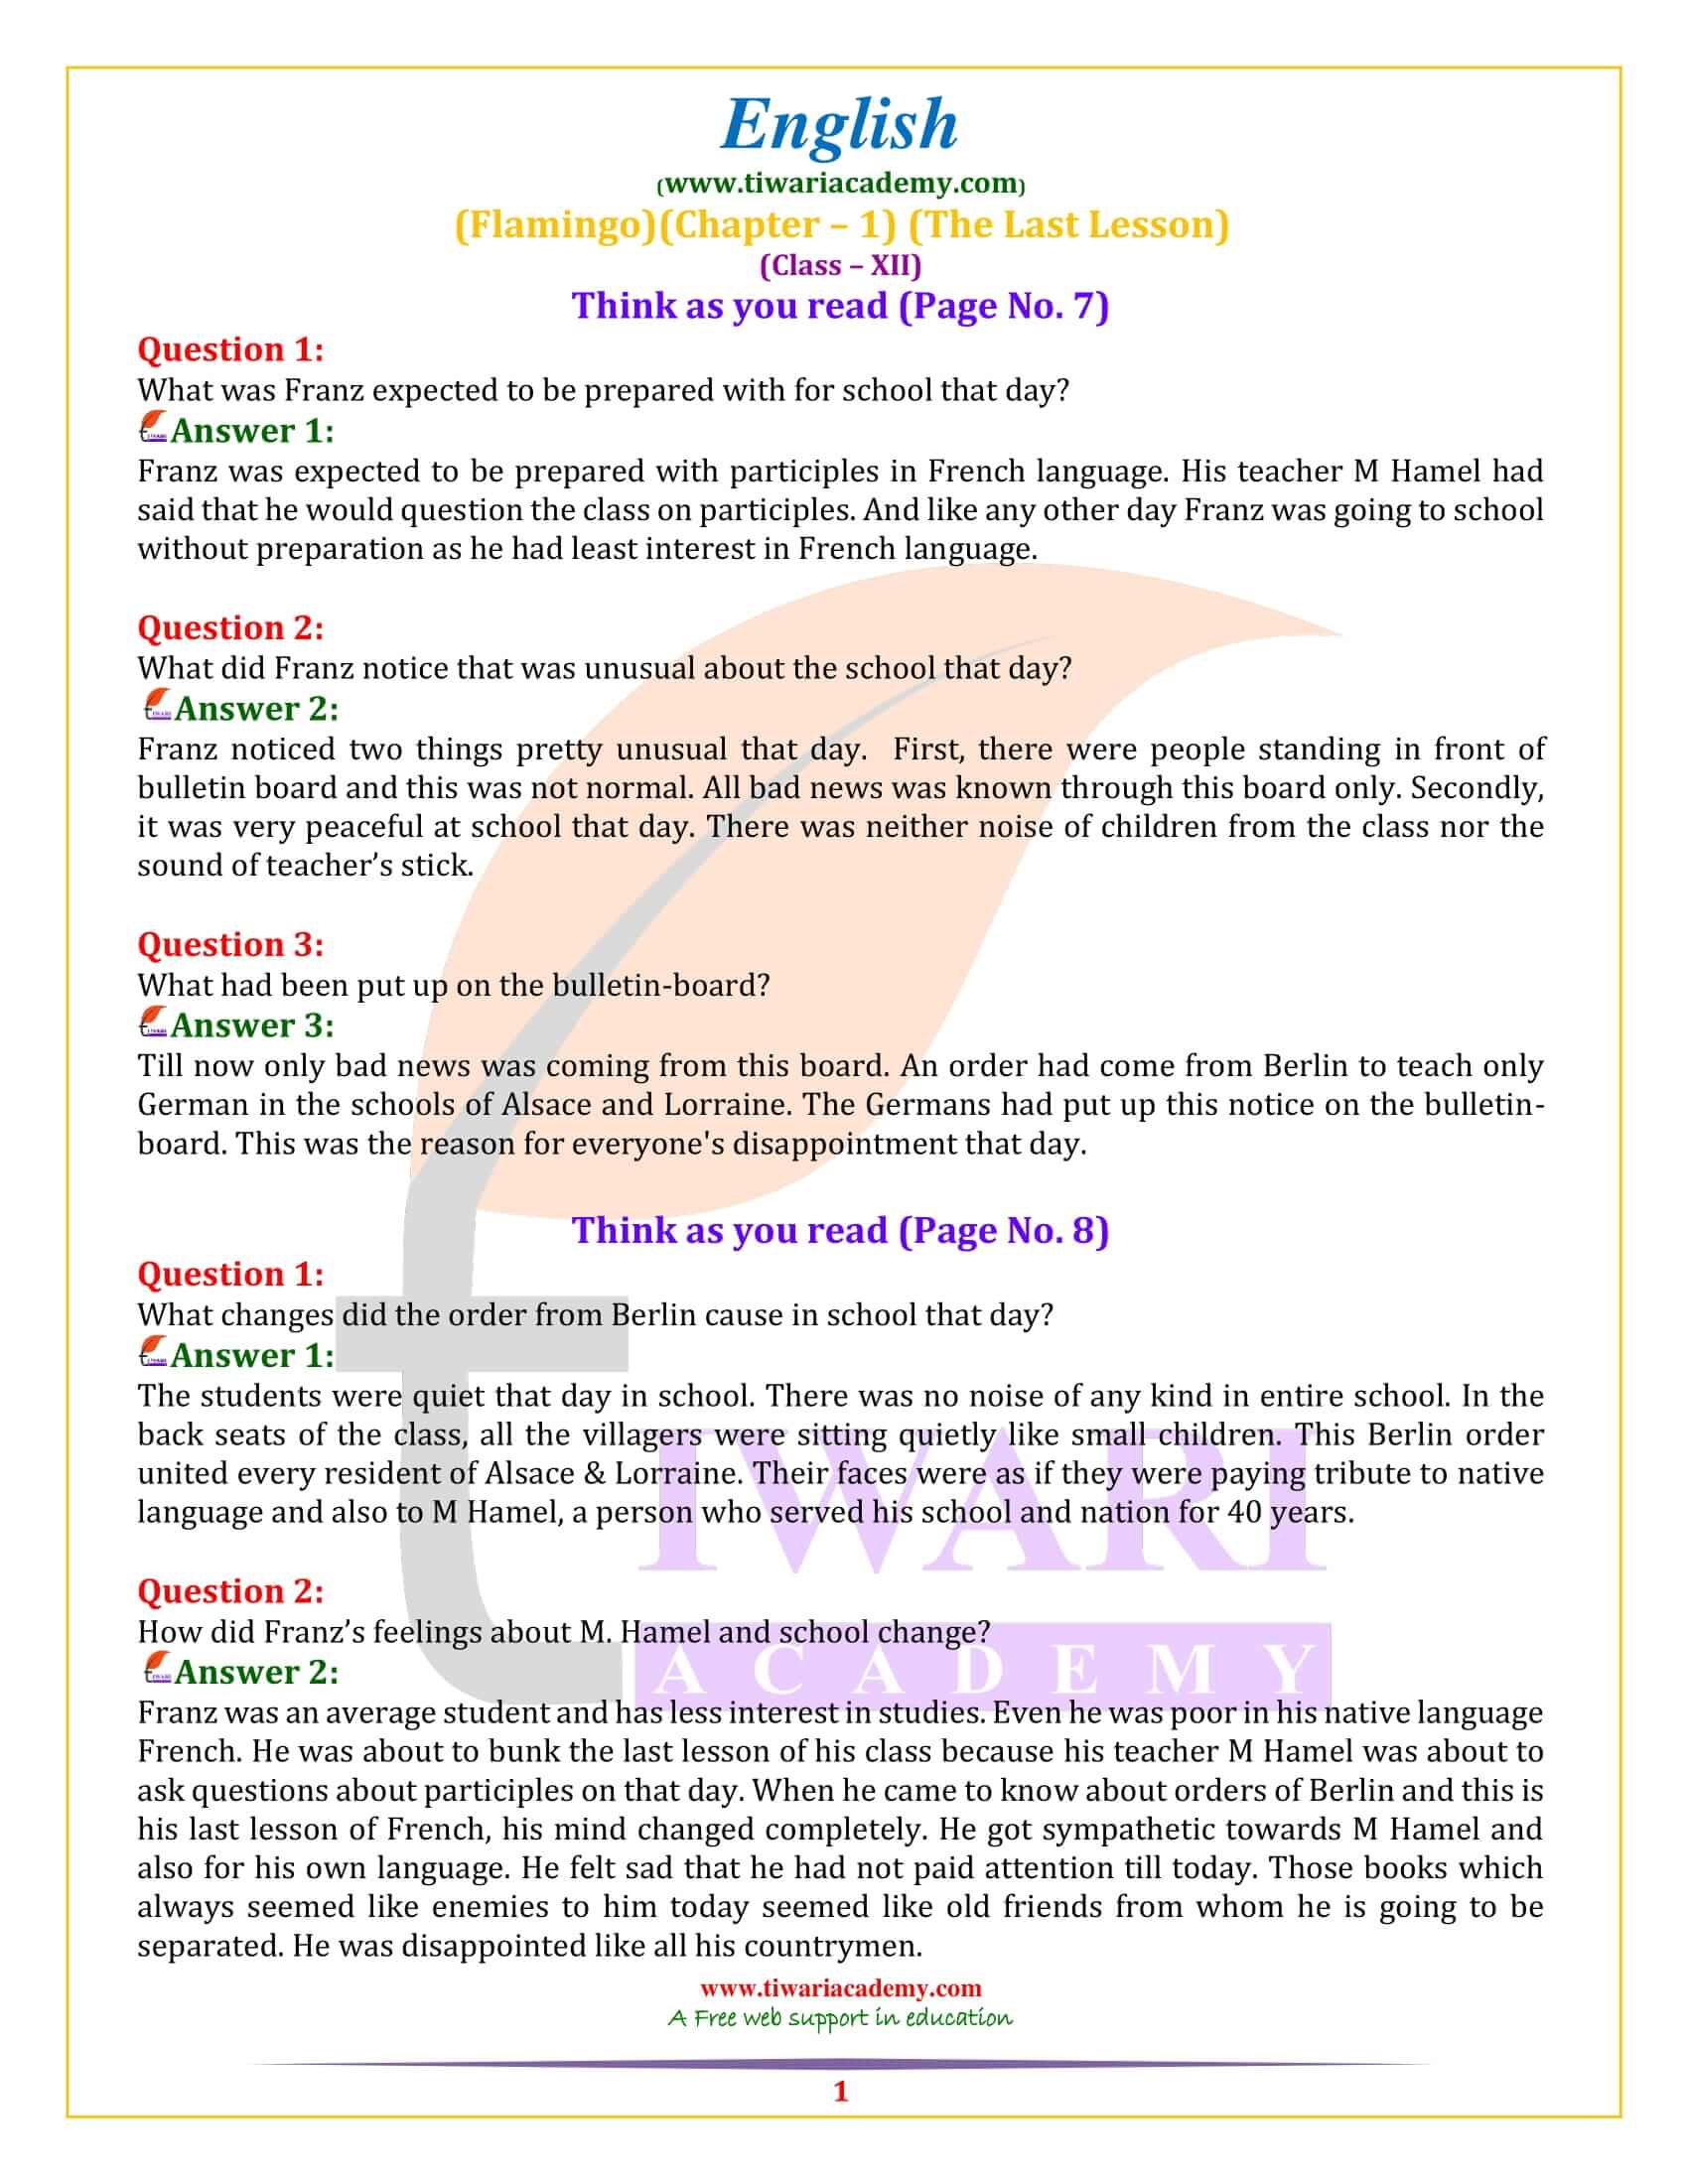 NCERT Solutions for Class 12 English Flamingo Chapter 1 the Last Lesson